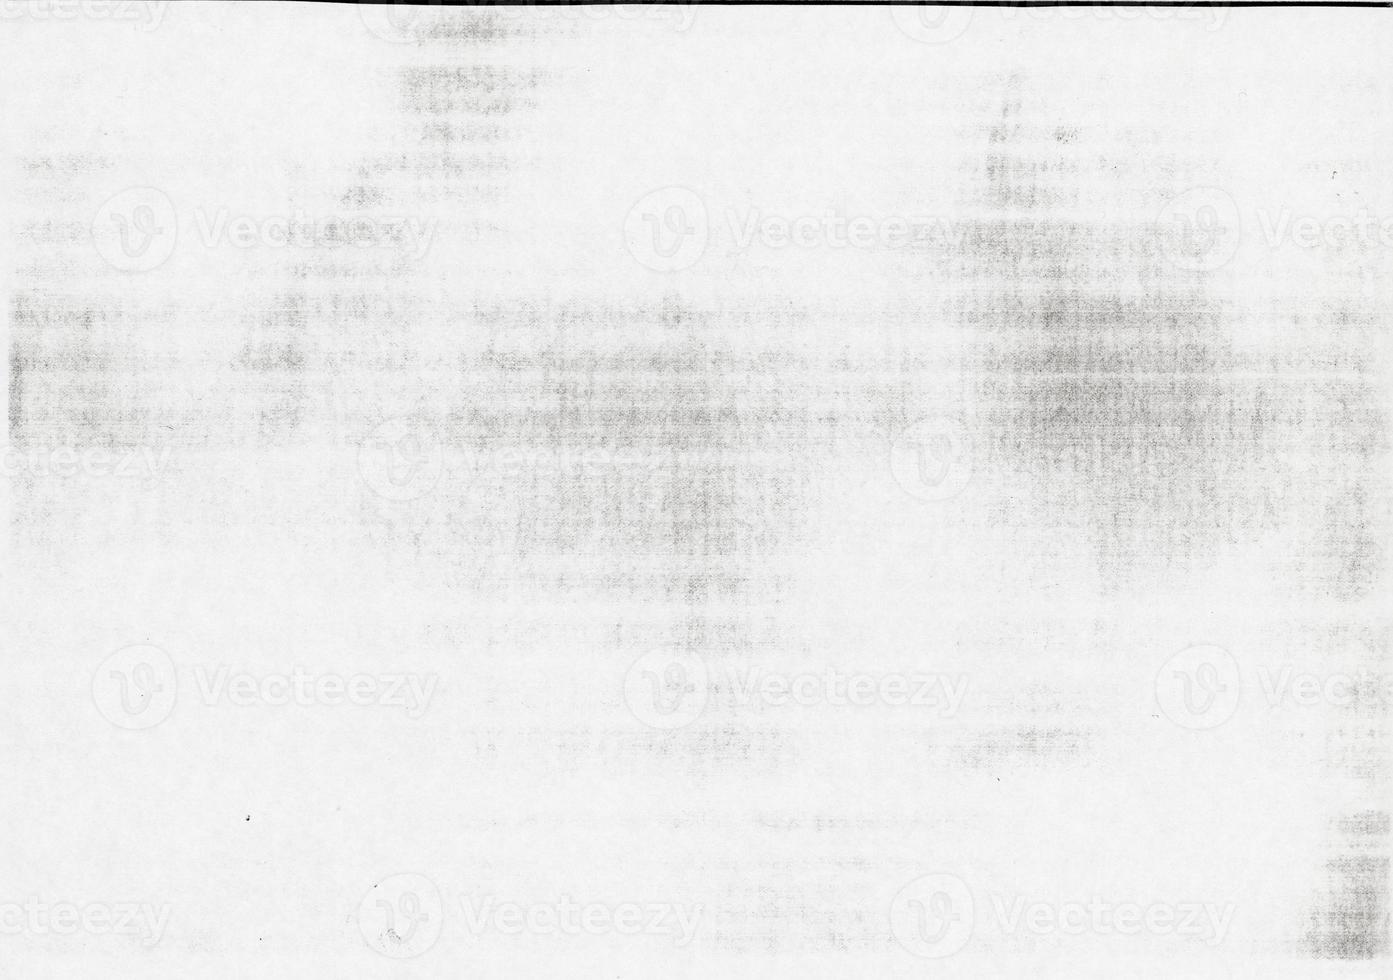 grunge dirty photocopy gray paper texture background photo